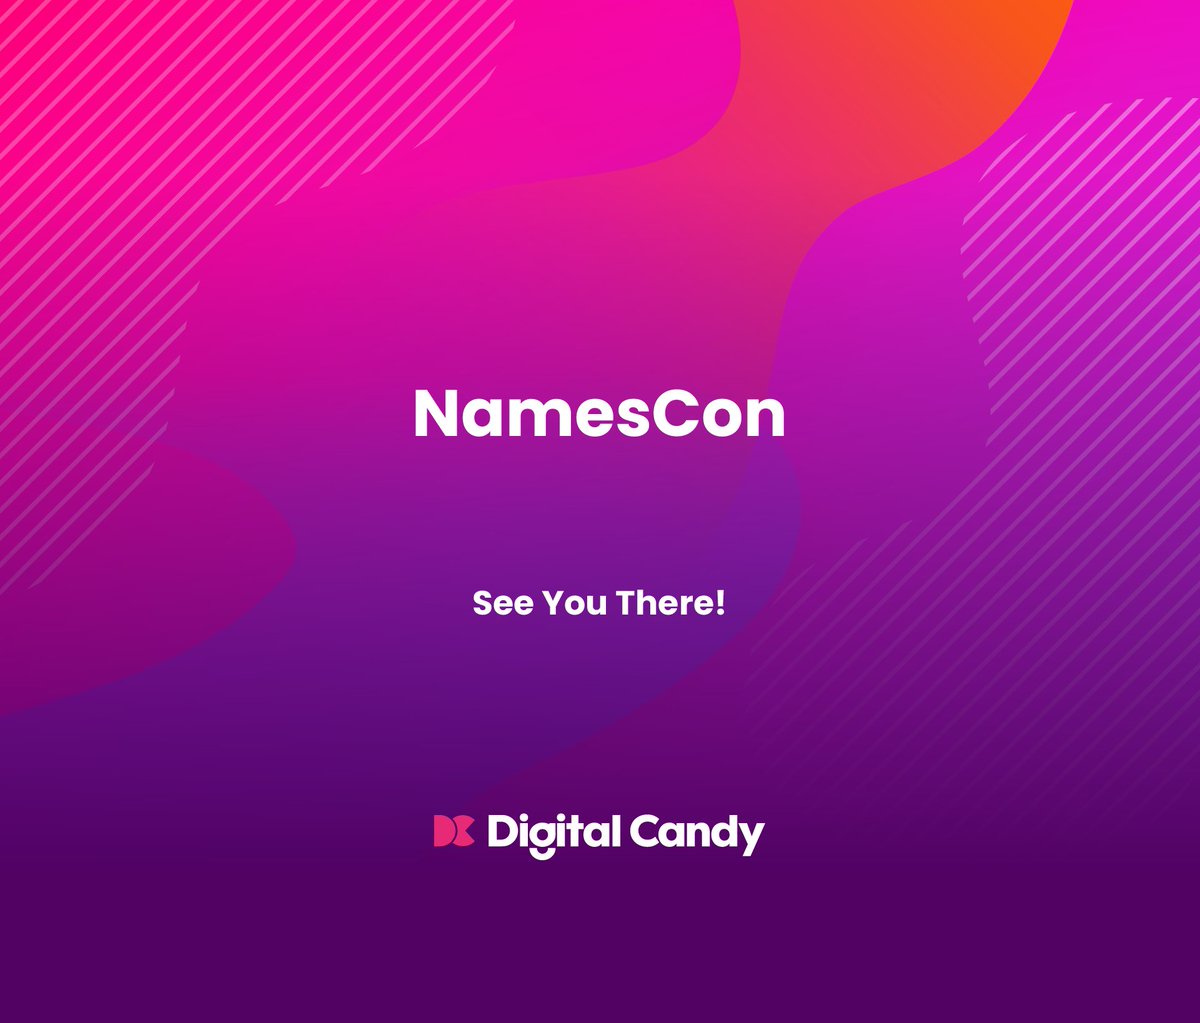 Looking forward to @NamesCon  next week.

Will be great to meet many of the people we have spoken to for the last few years!

#domainnames